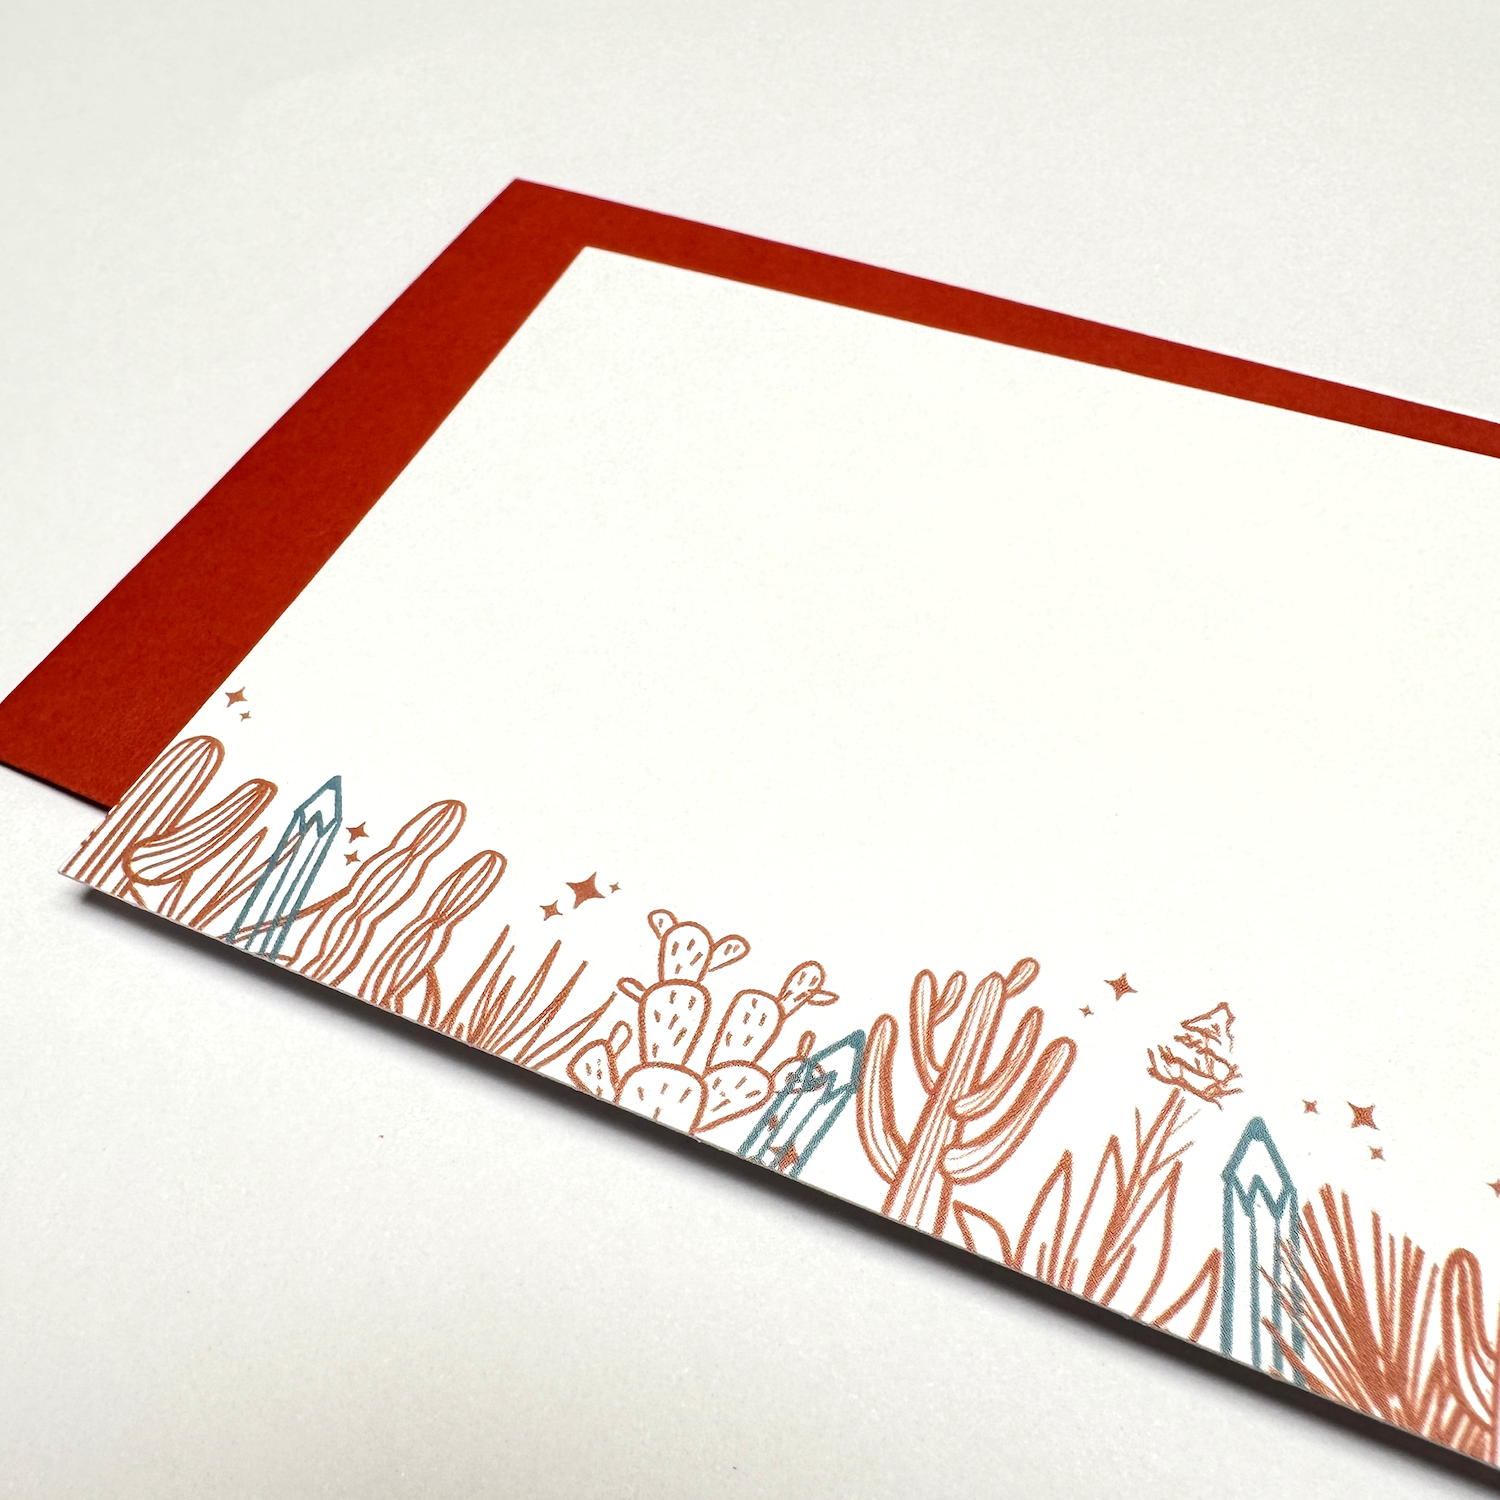 Close up of flat card and rust red envelope on white background. Flat card is 3.5 x 5 inches, landscape orientation, white background with illustrations on the lower fifth of the card. The illustration is a line drawing of cactus, sparkle stars, and agave in rust red ink and four pencils pointy side up in blue ink hiding amongst the plants.